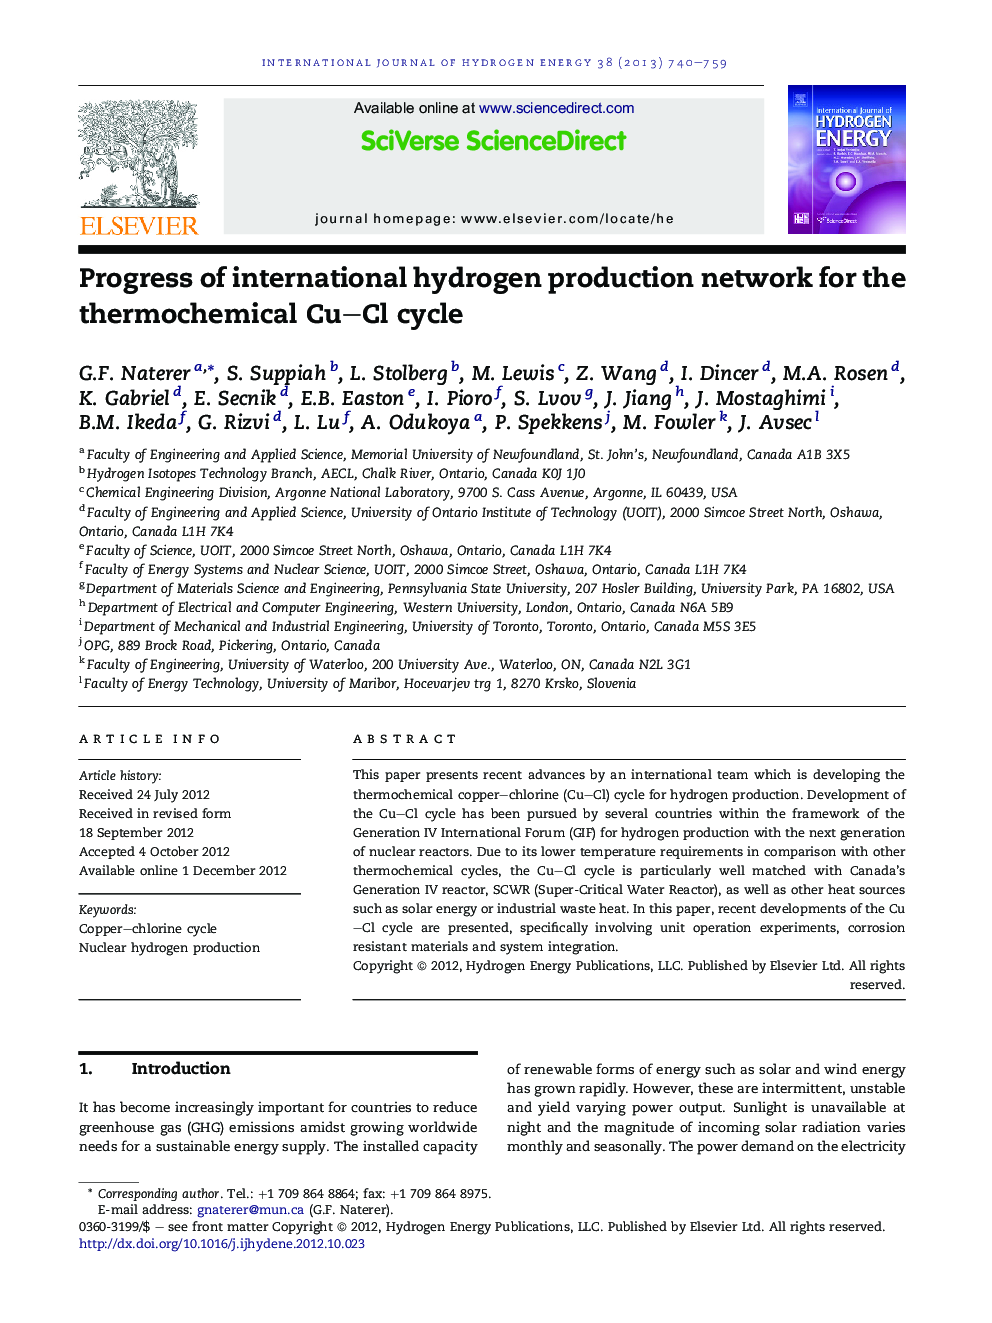 Progress of international hydrogen production network for the thermochemical Cu–Cl cycle